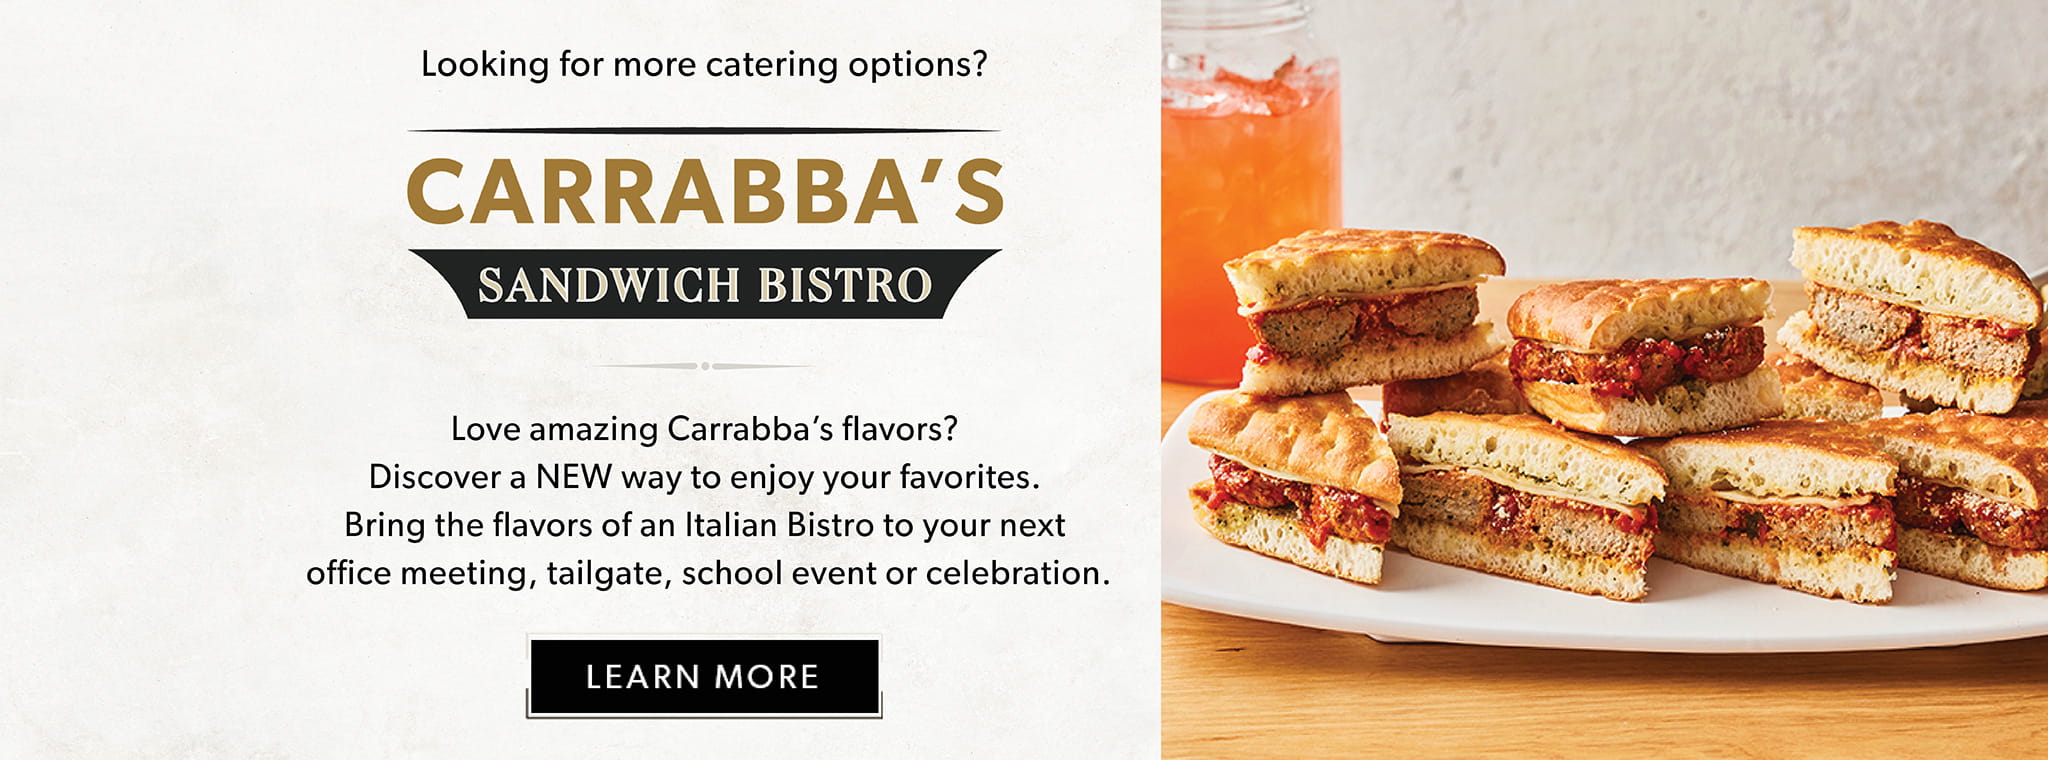 Looking for more catering options? Love amazing Carrabba's flavors? Carrabba's Sandwich Bistro - Learn More